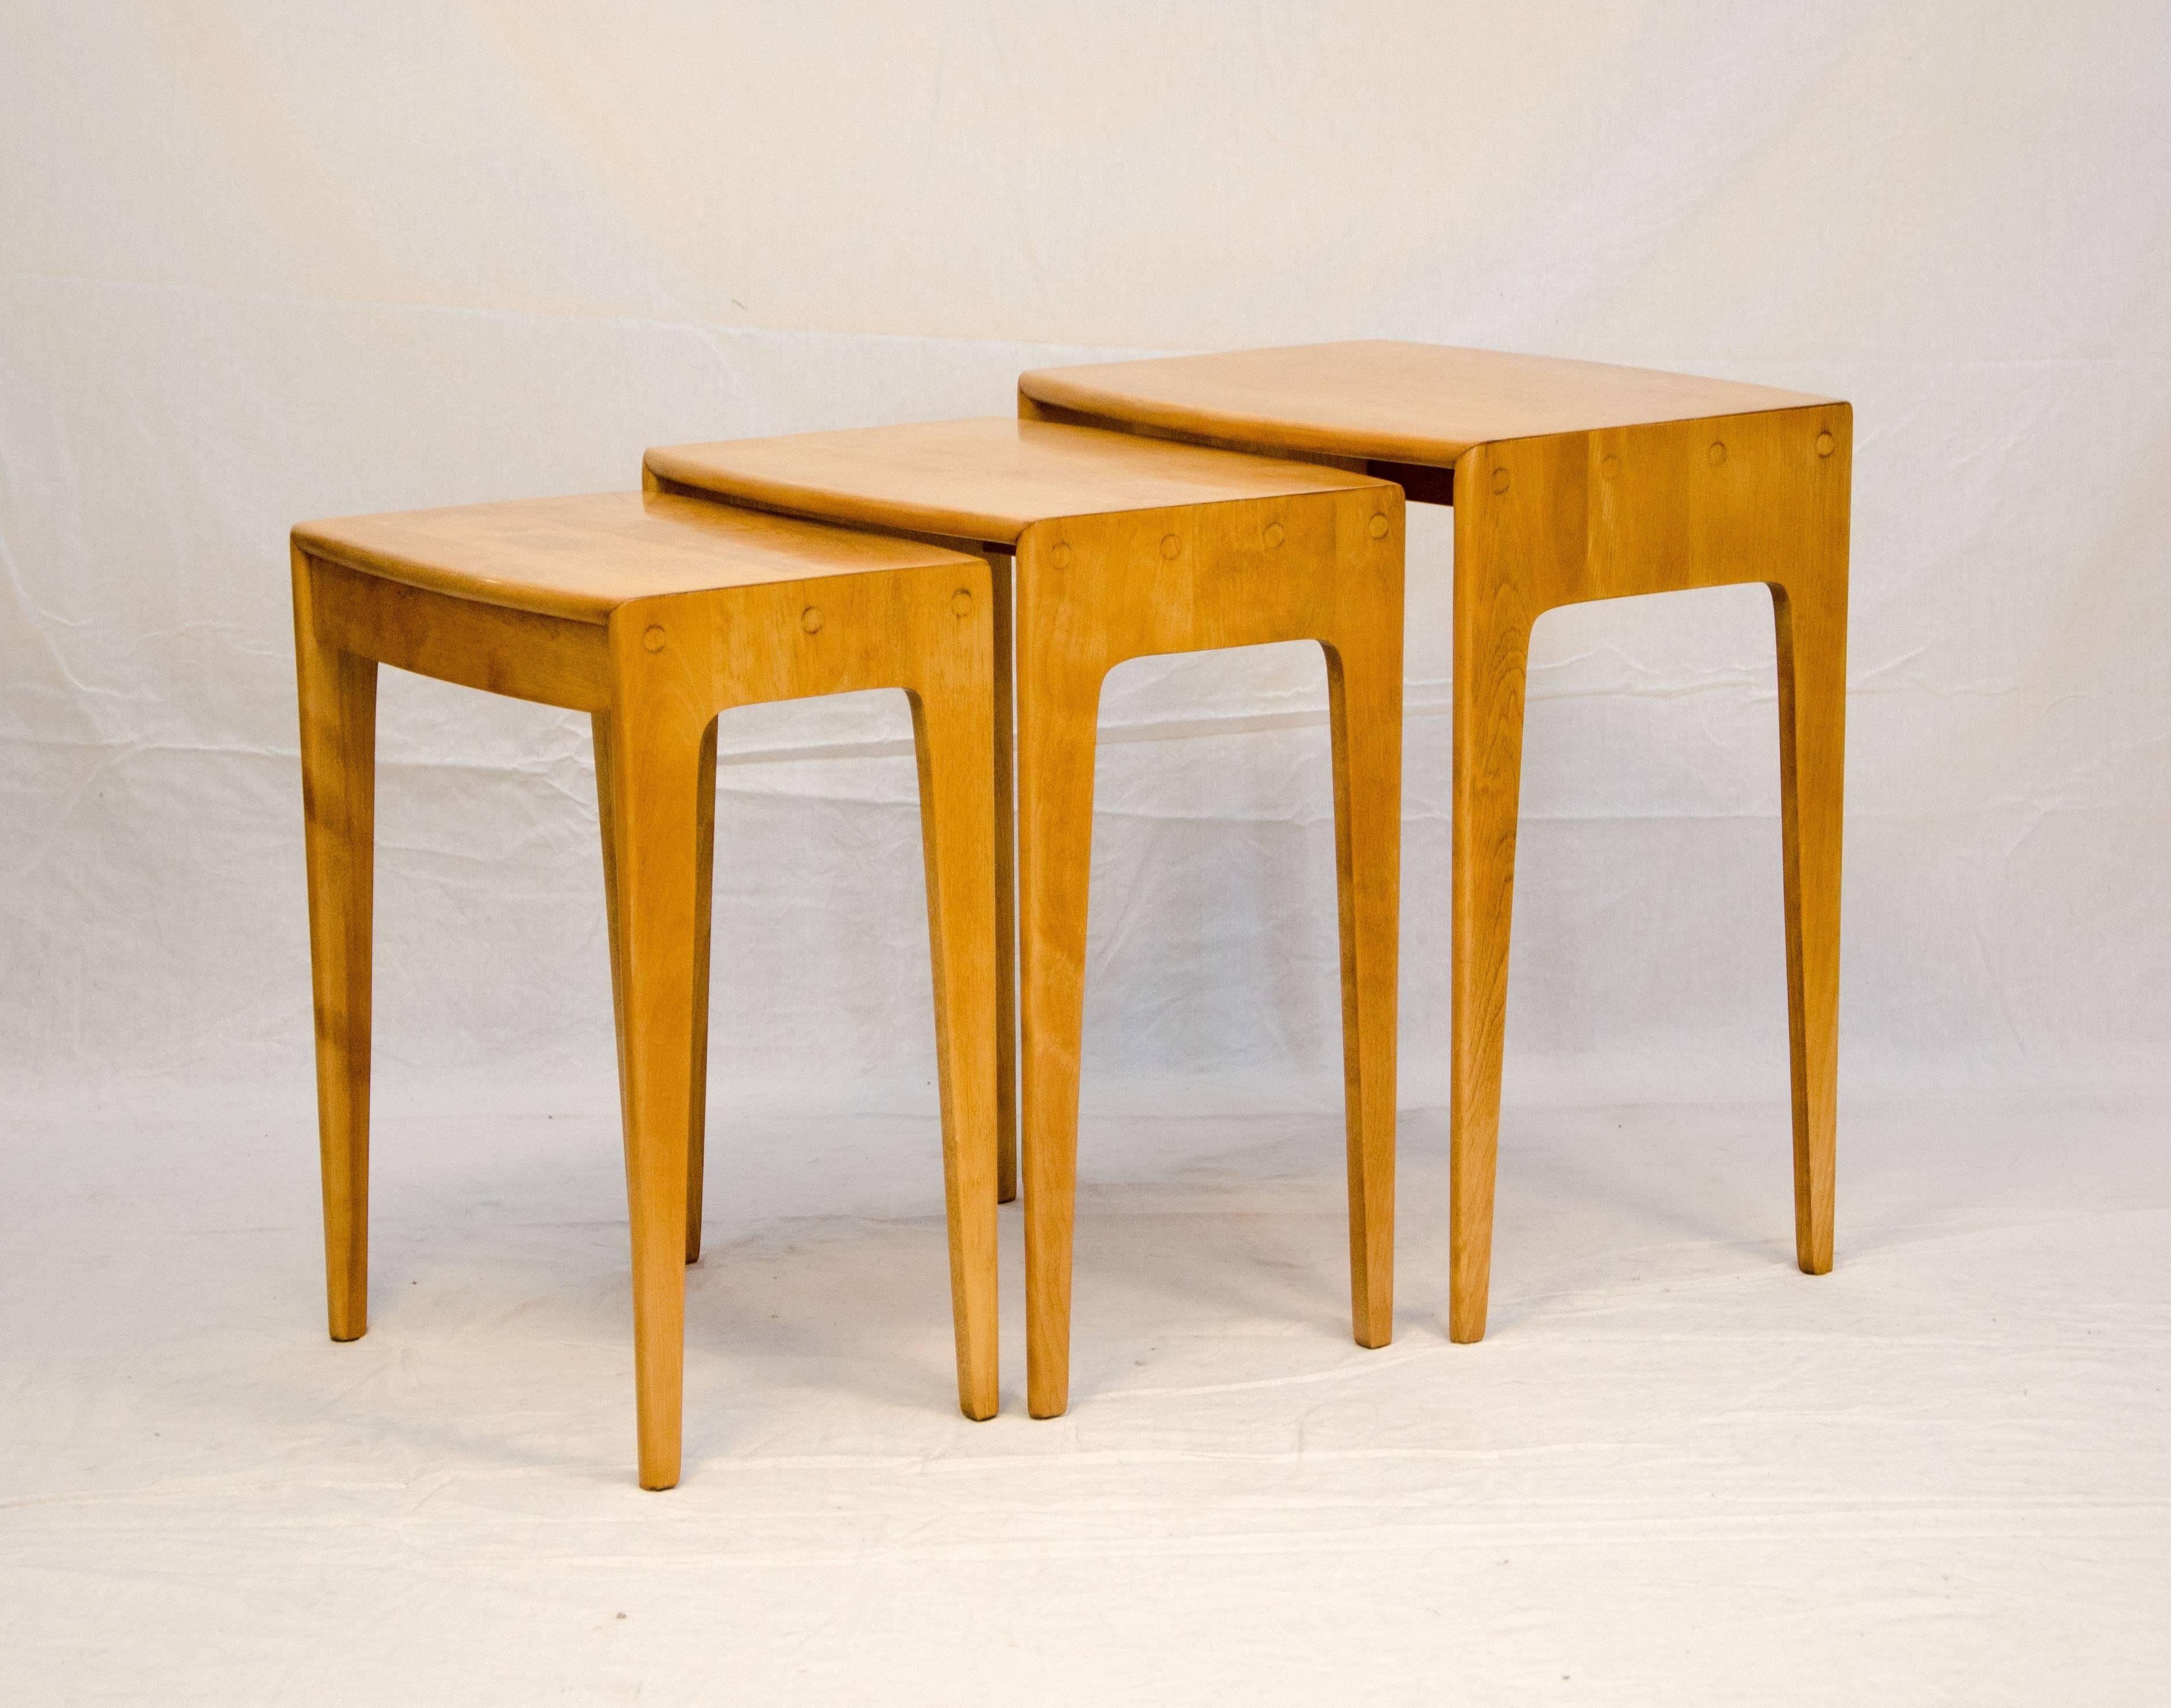 Very functional set of three nesting tables in solid birch. Perfect for sofa ends or between chairs.
The tables measure:
21